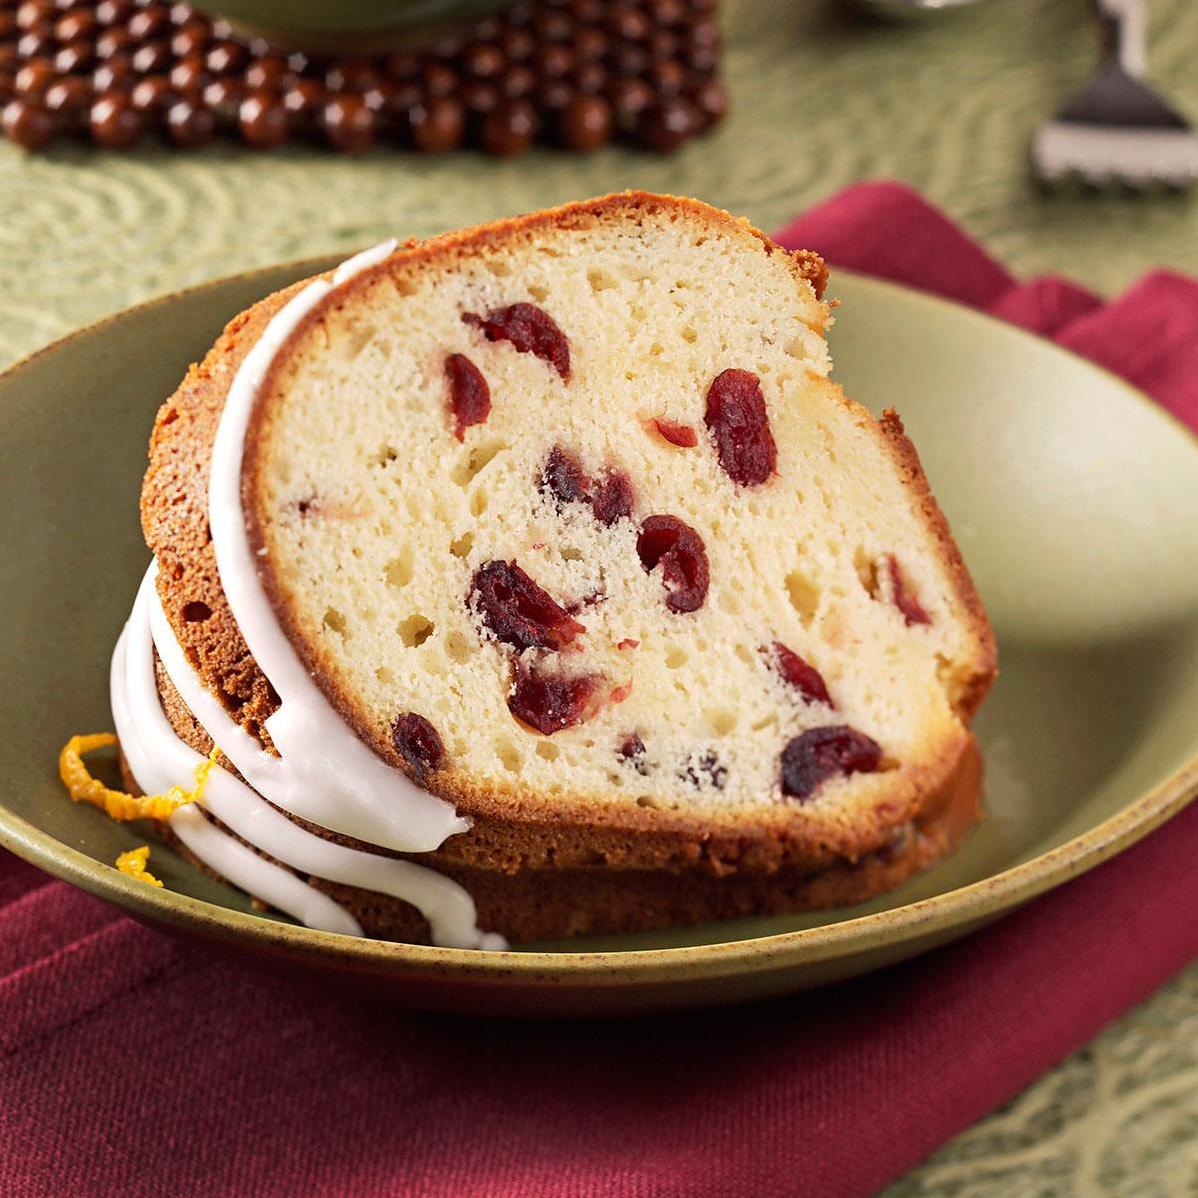  Dense, buttery and moist. The perfect combination for a delicious pound cake.